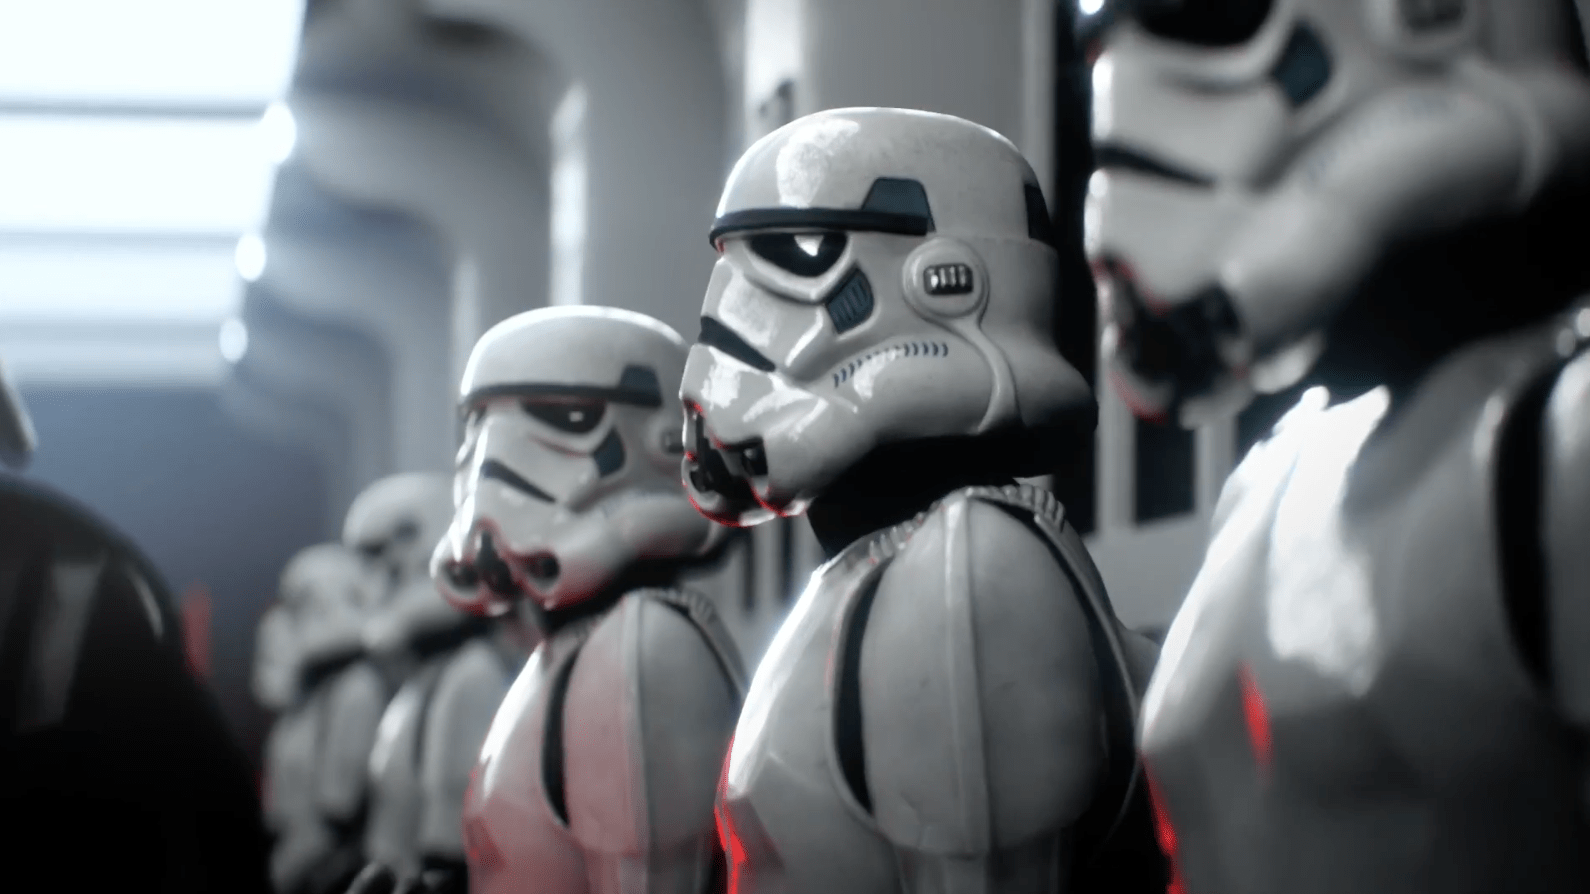 We’ve Finally Seen A Campaign Mission From Star Wars: Battlefront 2